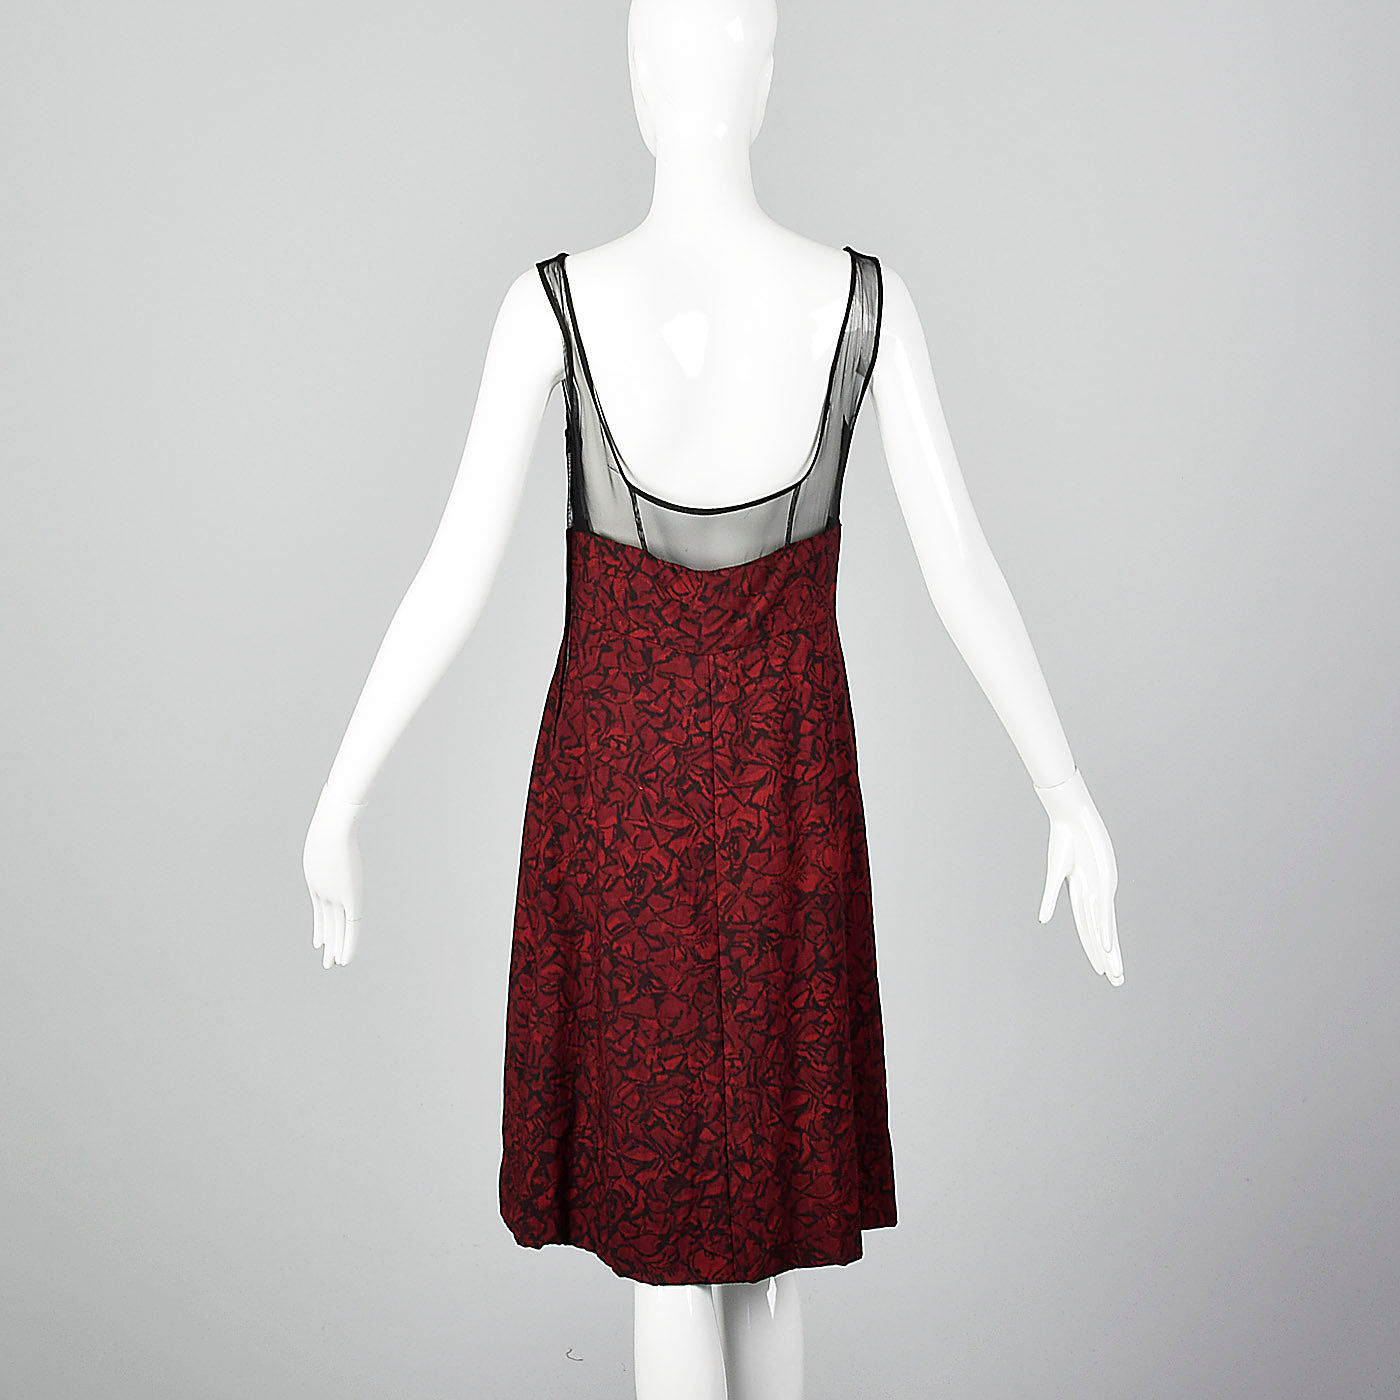 1960s Black and Red Print Dress with Mesh Bodice and Matching Overlay Top